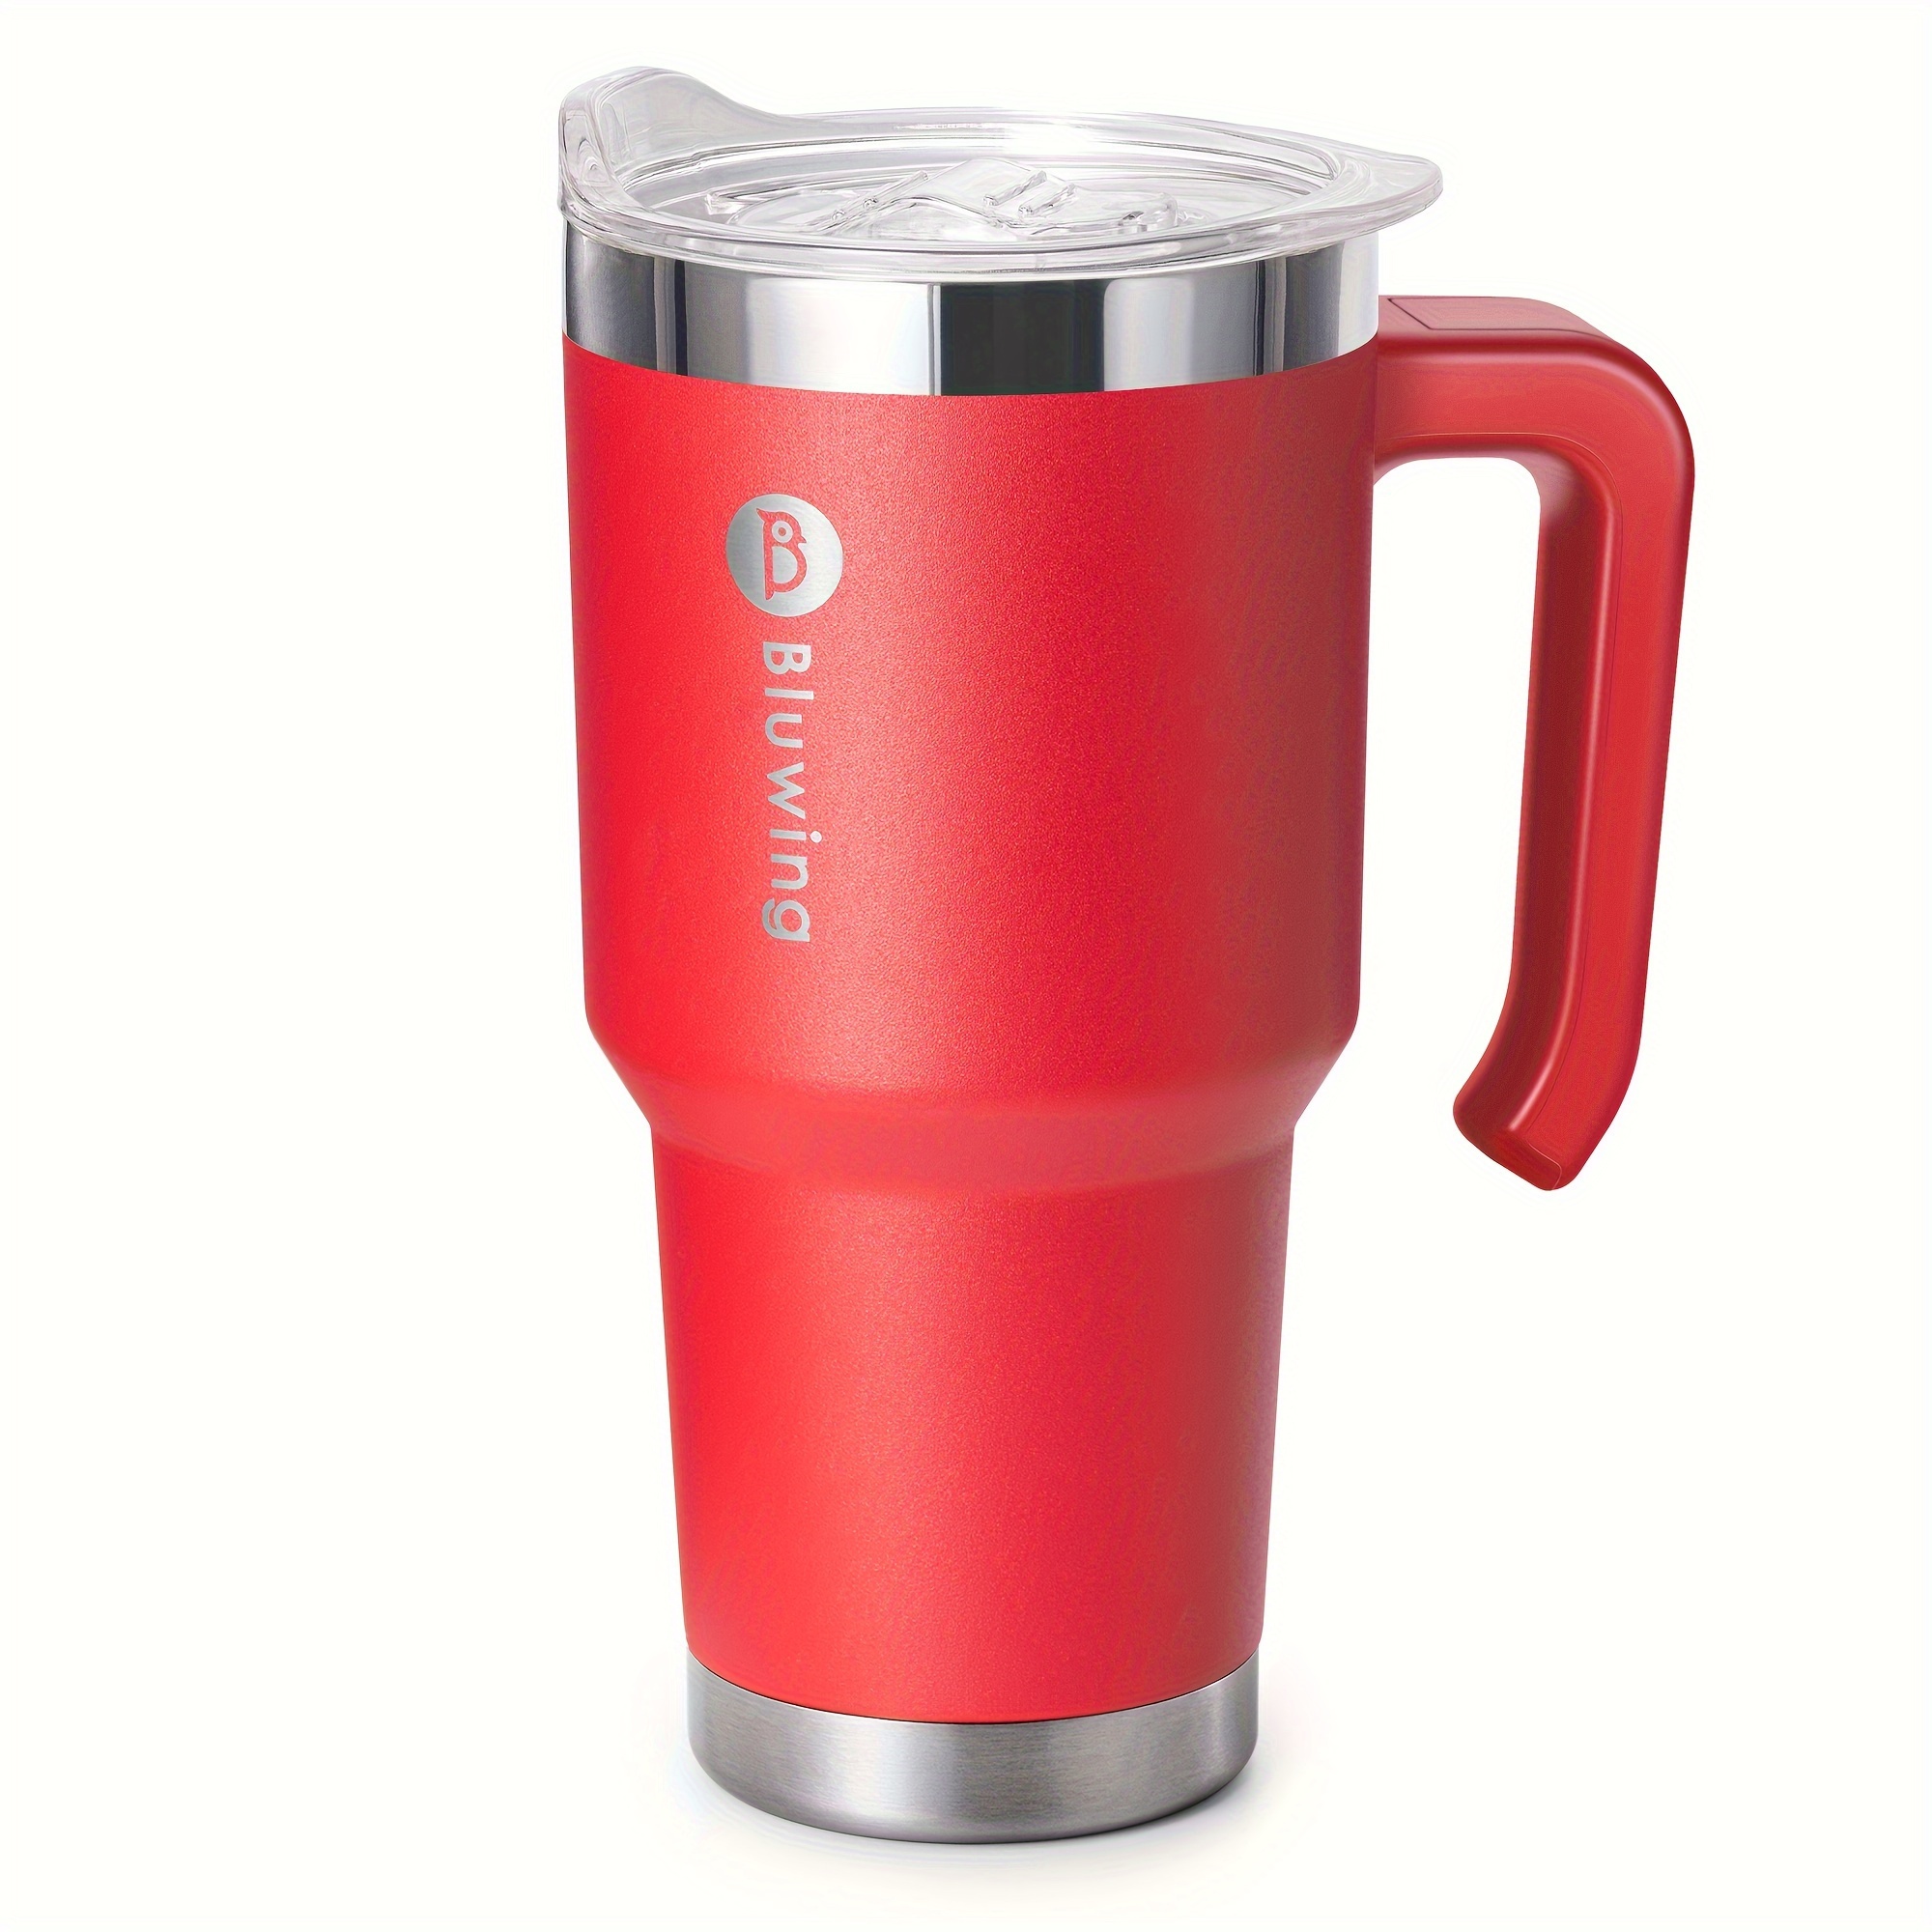 30z Stainless Steel Coffee Mug With Handle, Double Wall Vacuum Insulated  Mug, With Spill-proof Lid, For Traveling